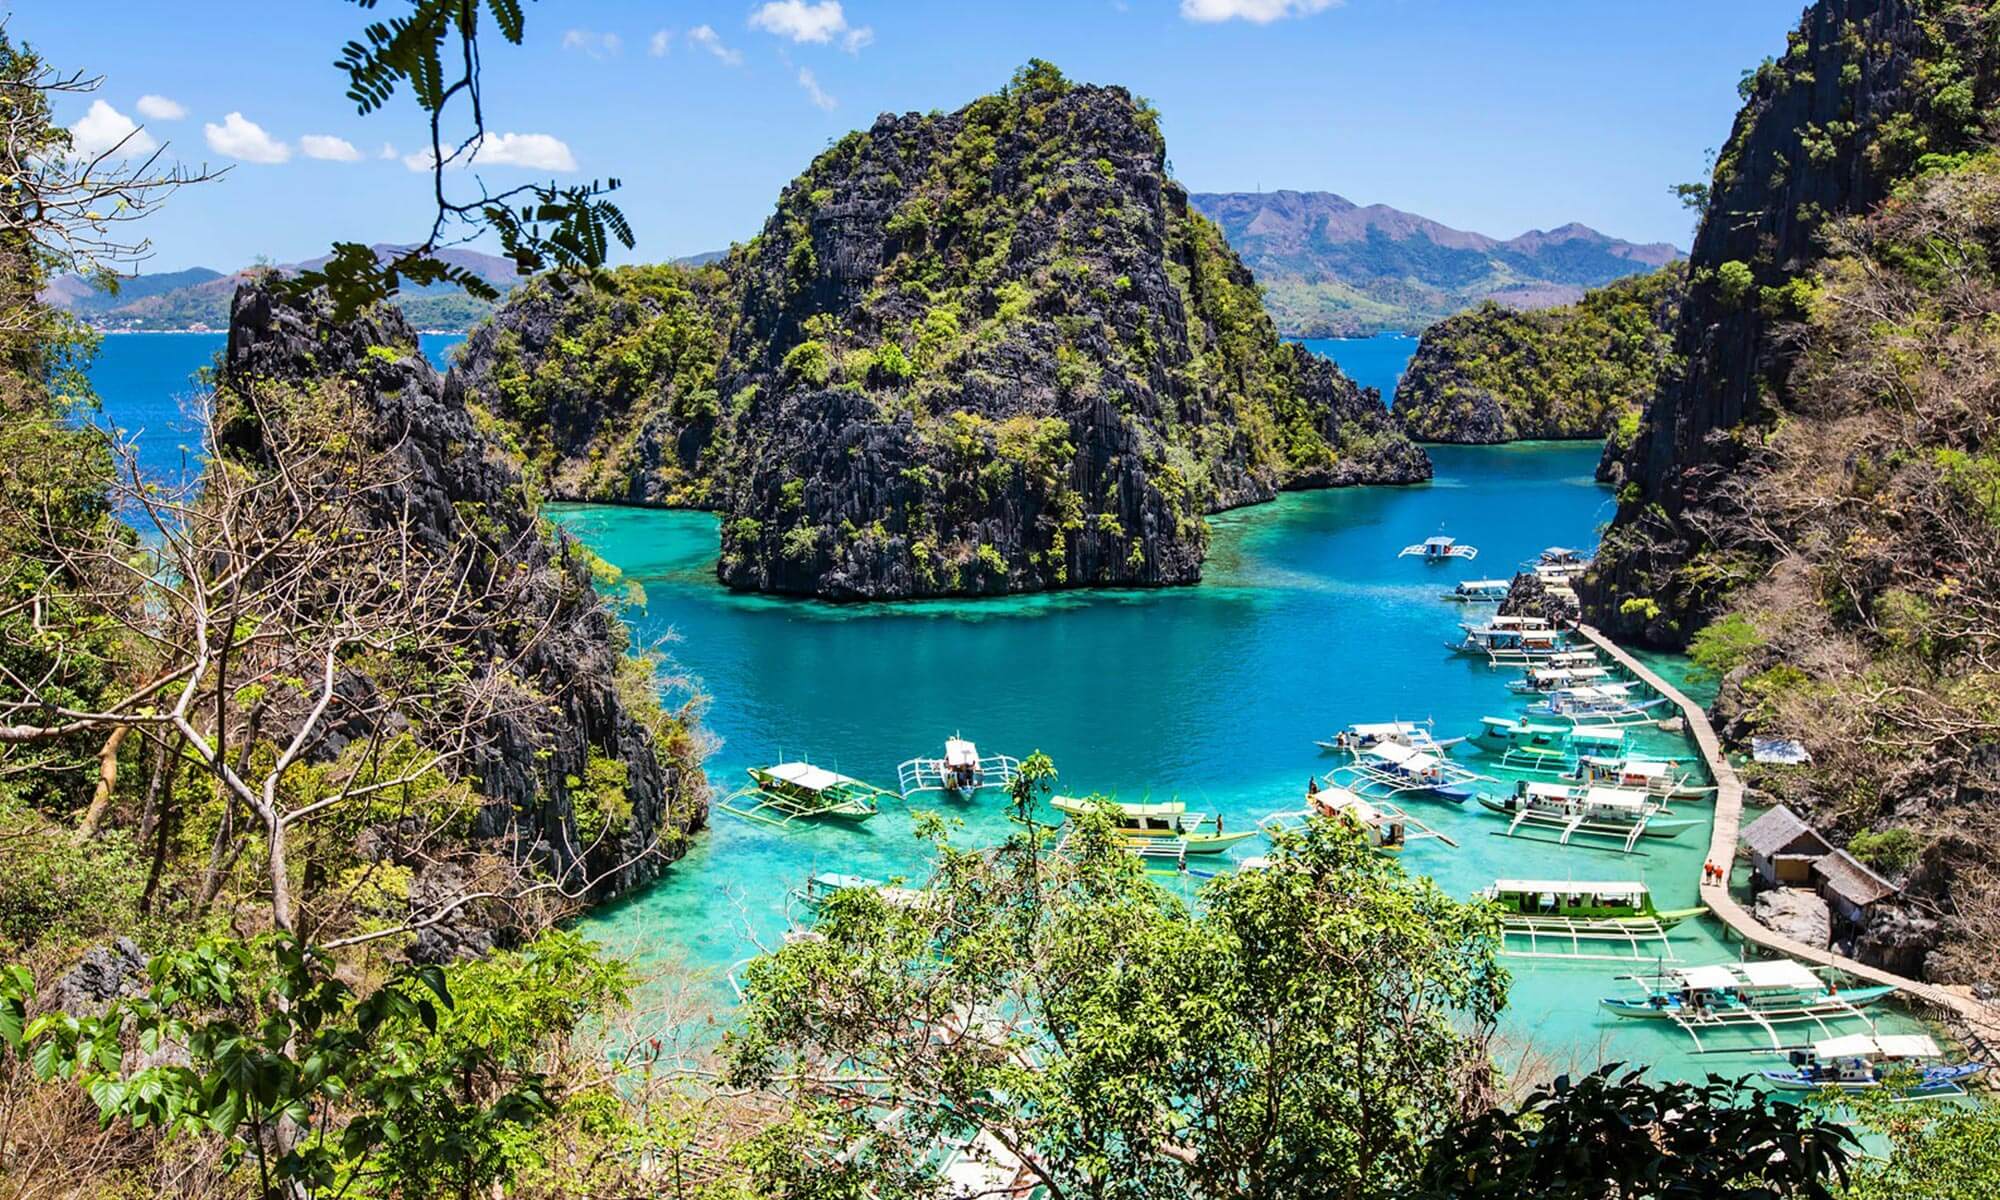 El Nido is a seaside town and popular tourist attraction in the Philippines' Palawan Island